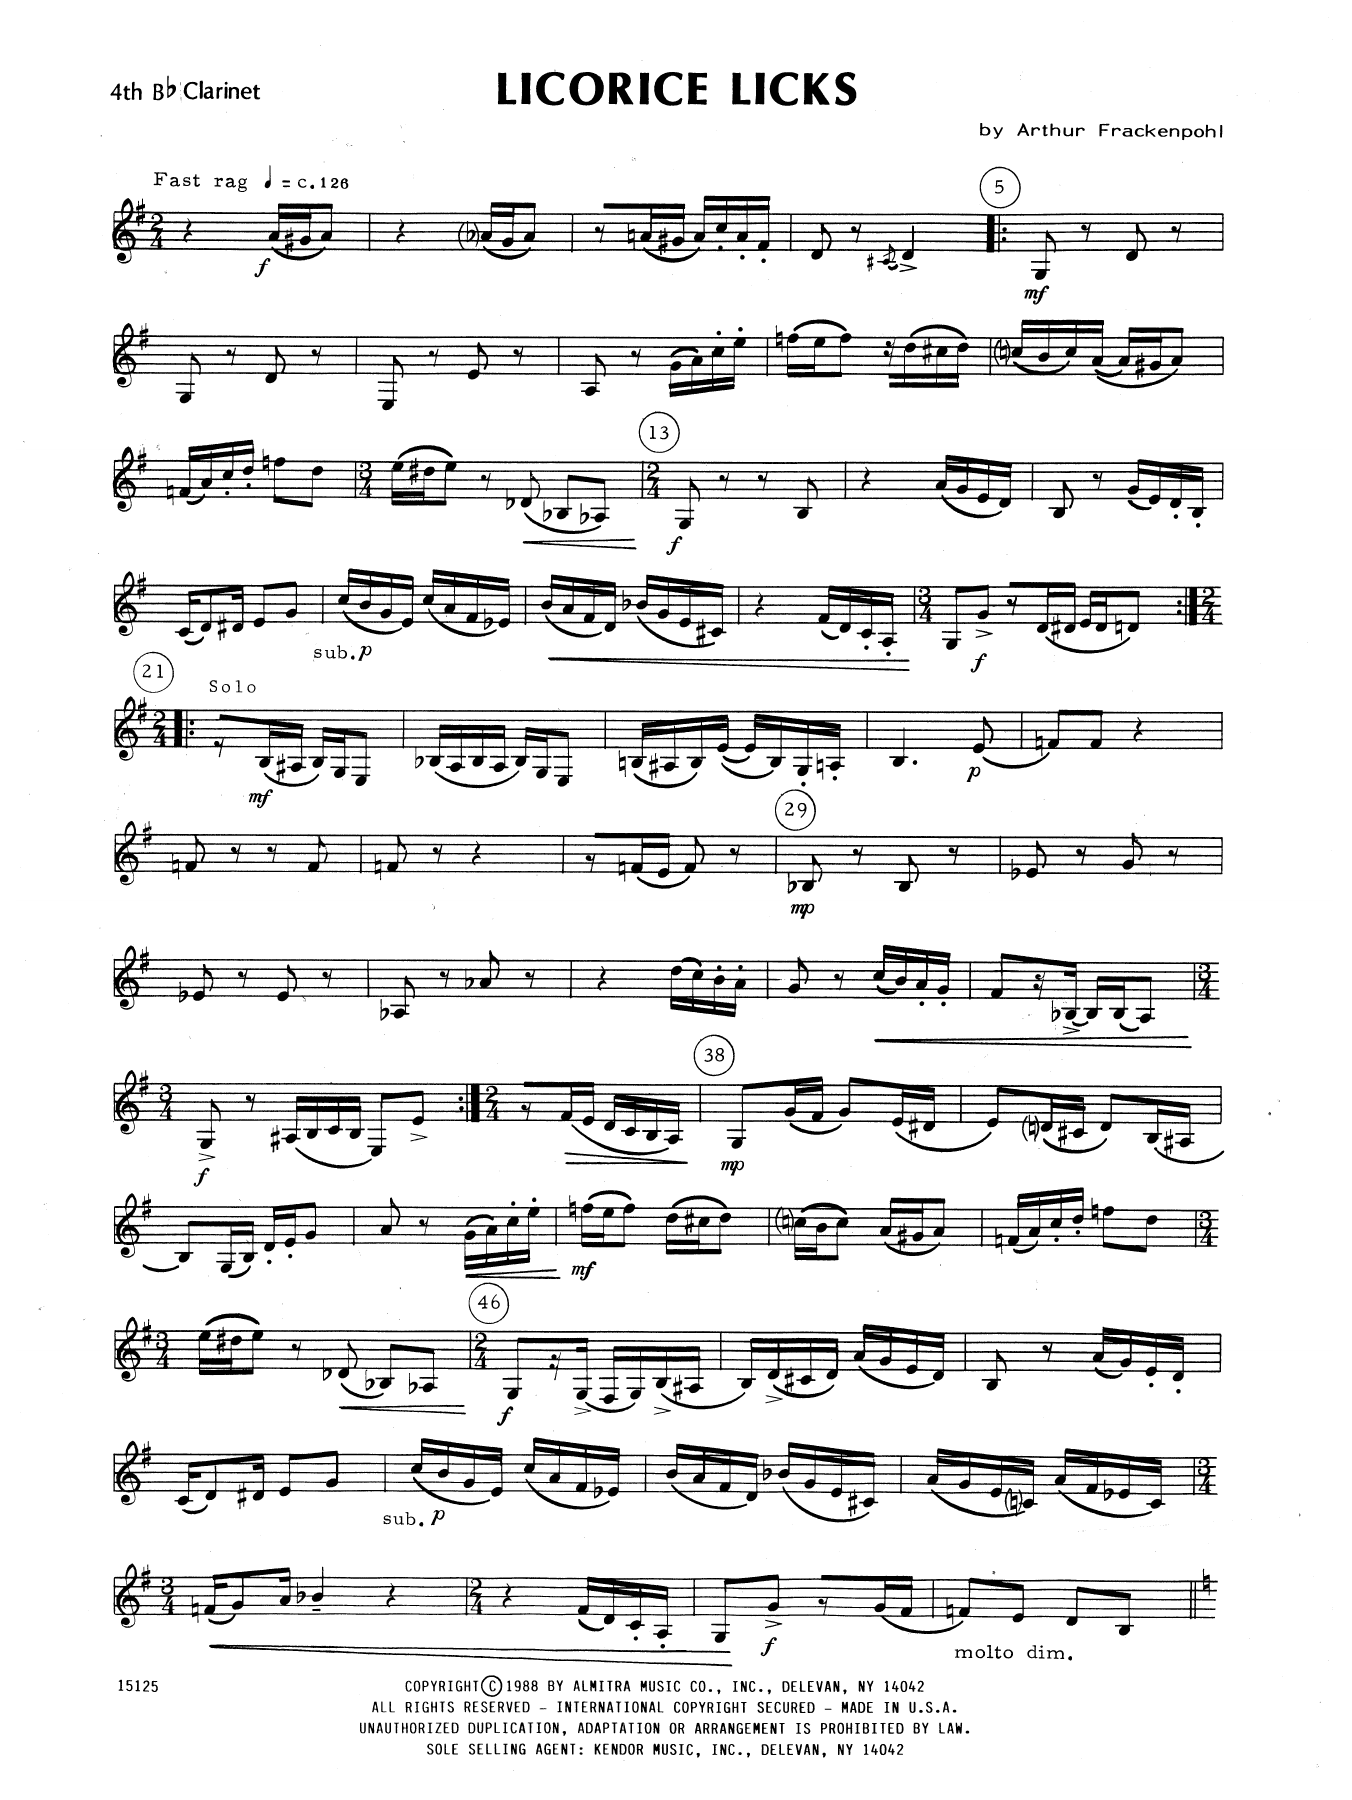 Arthur Frackenpohl Licorice Licks - 4th Bb Clarinet sheet music notes and chords. Download Printable PDF.